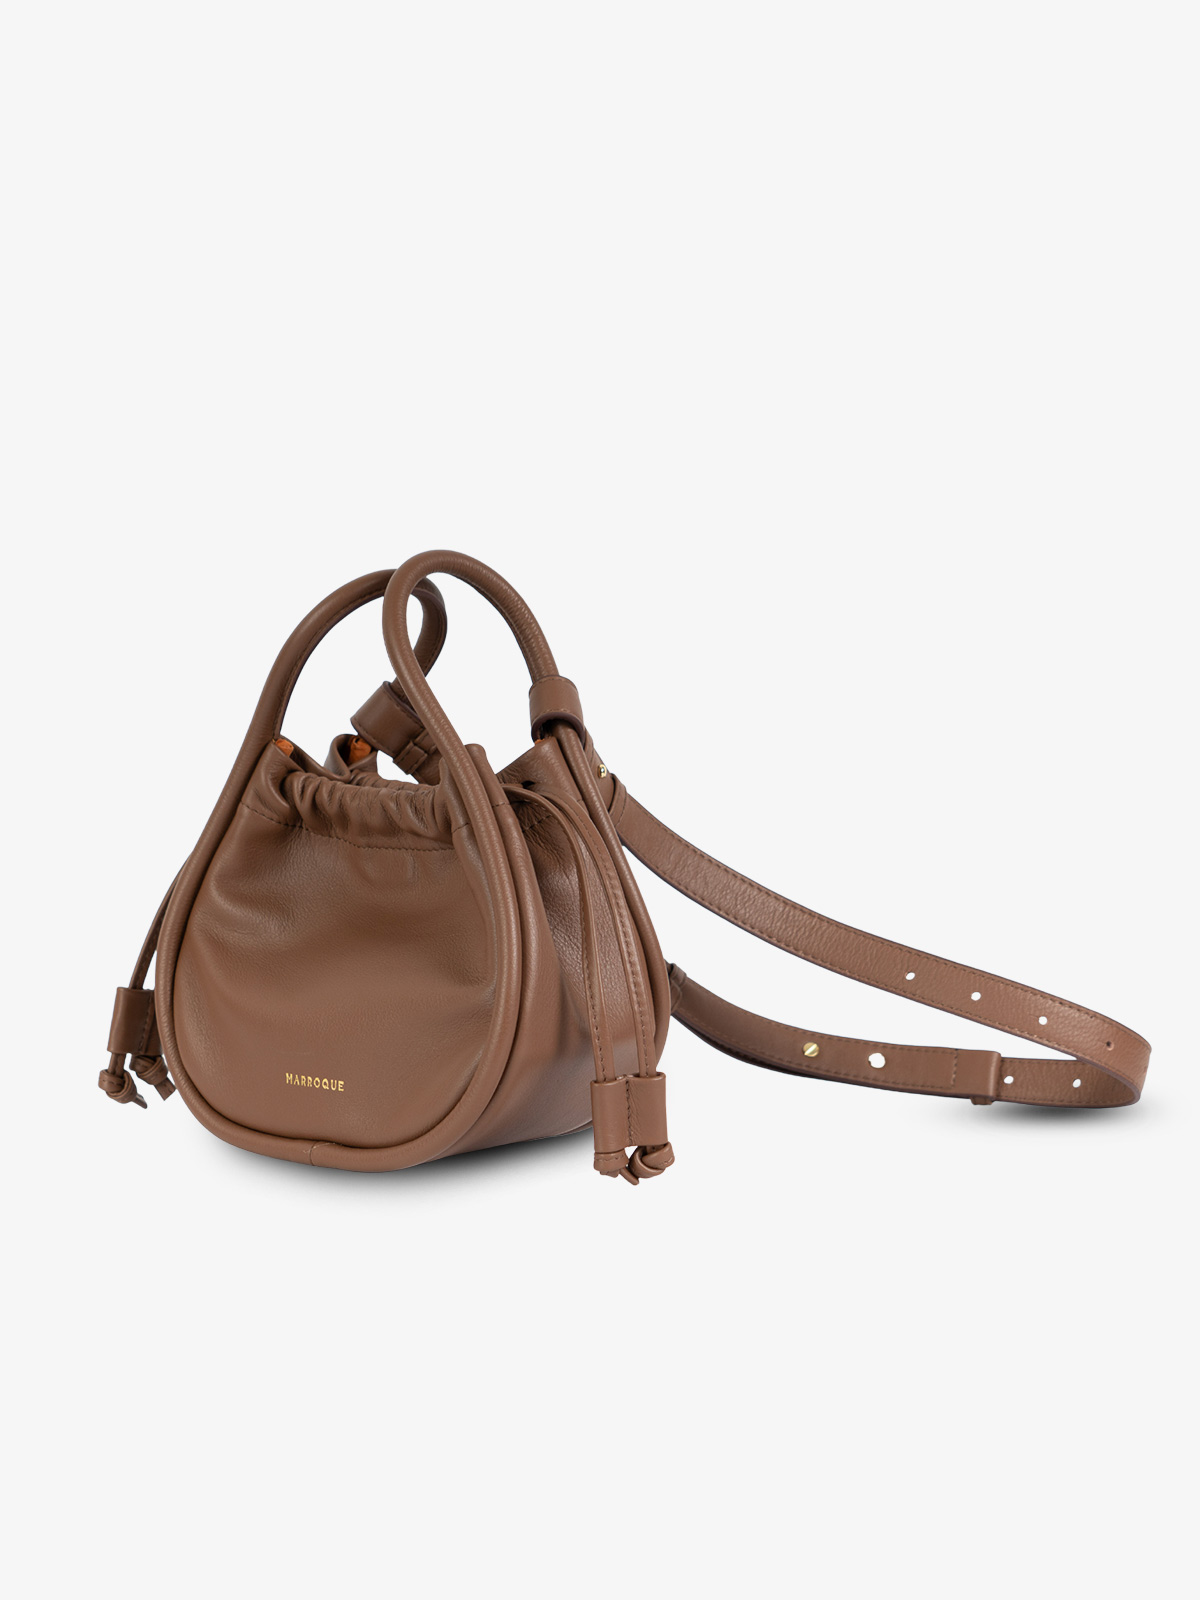 marroque leather bag balloon 20 chocolate